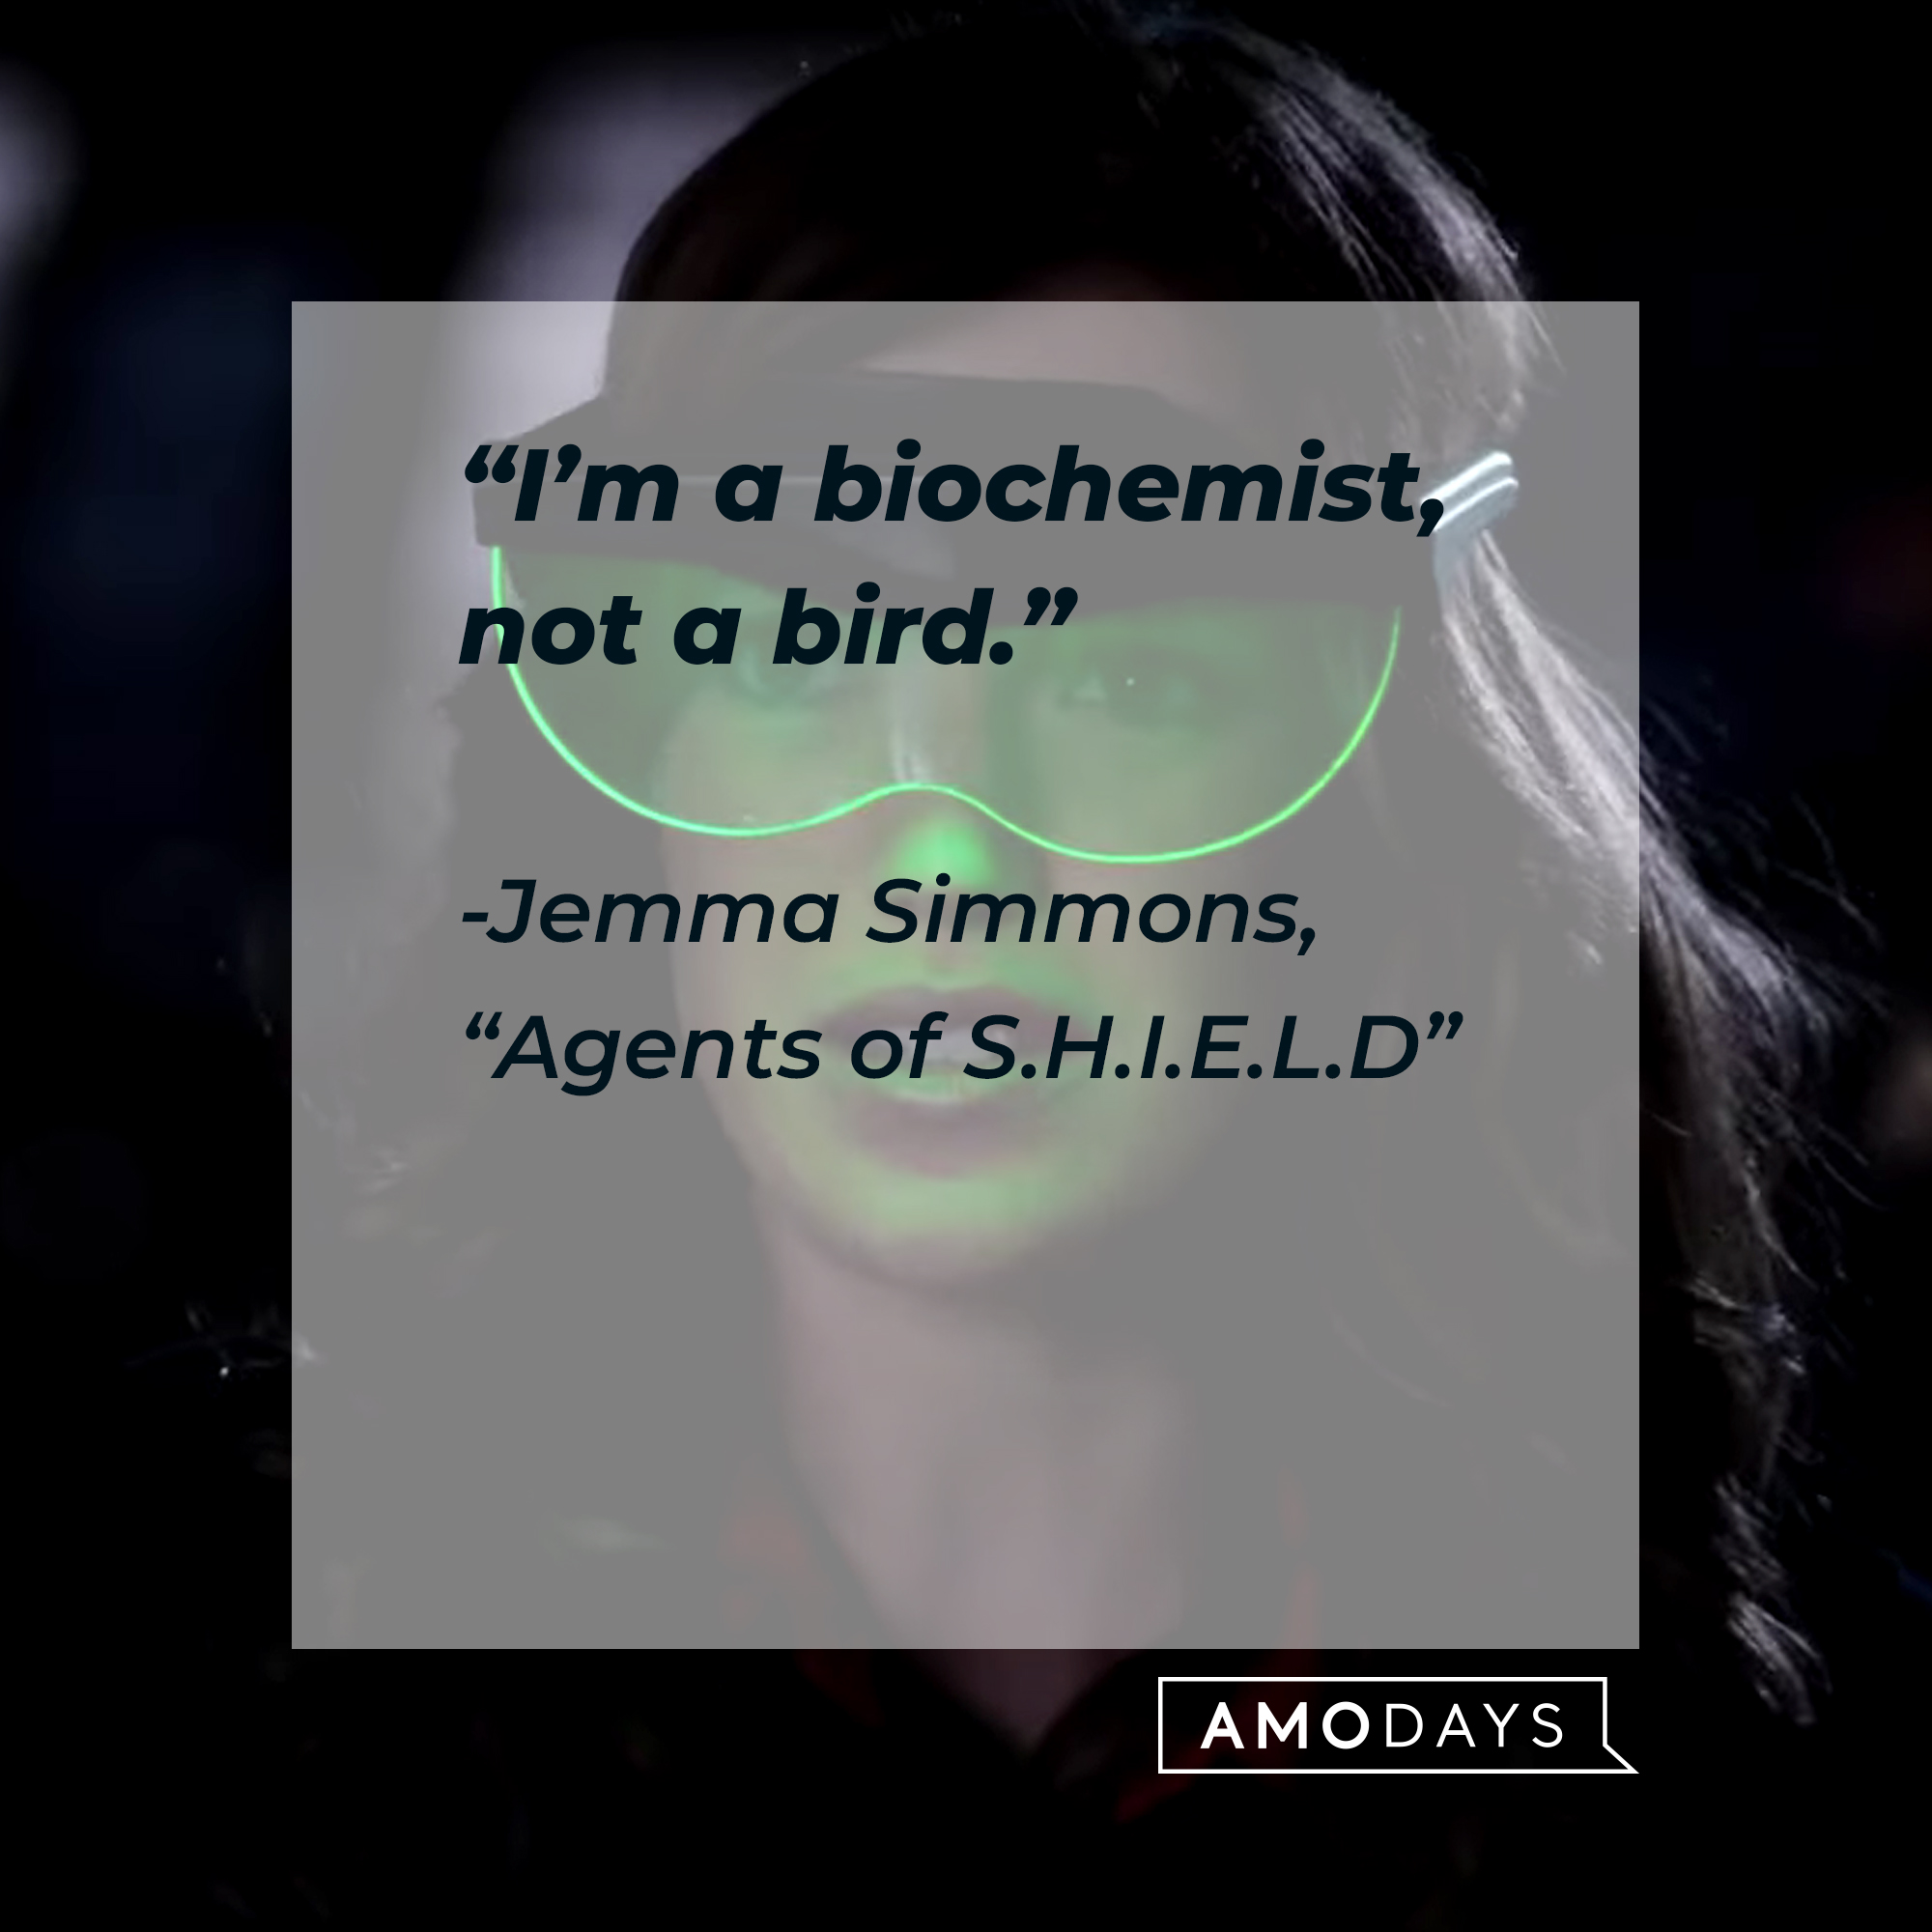 Jemma Simmons with her quote from "Agents of S.H.I.E.L.D.:" “I’m a biochemist, not a bird.” | Source: Facebook.com/AgentsofShield